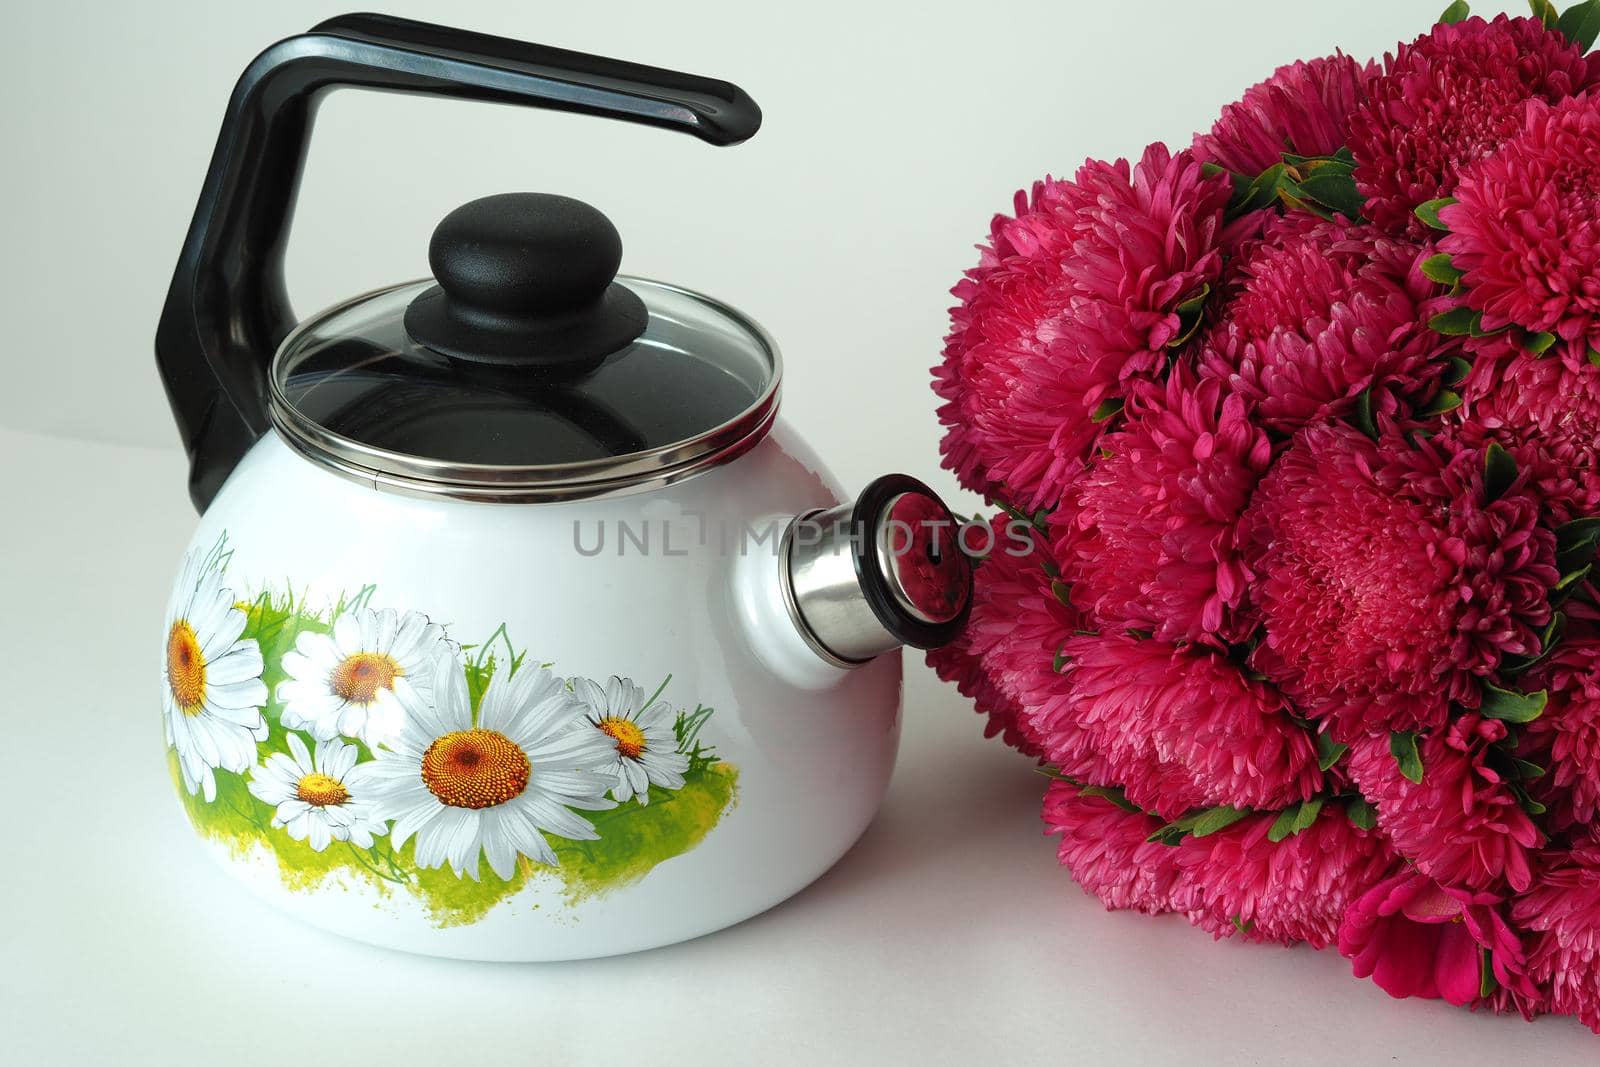 Enamelled utensils. Beautiful white enamelled kettle with whistle and pattern. by Olga26